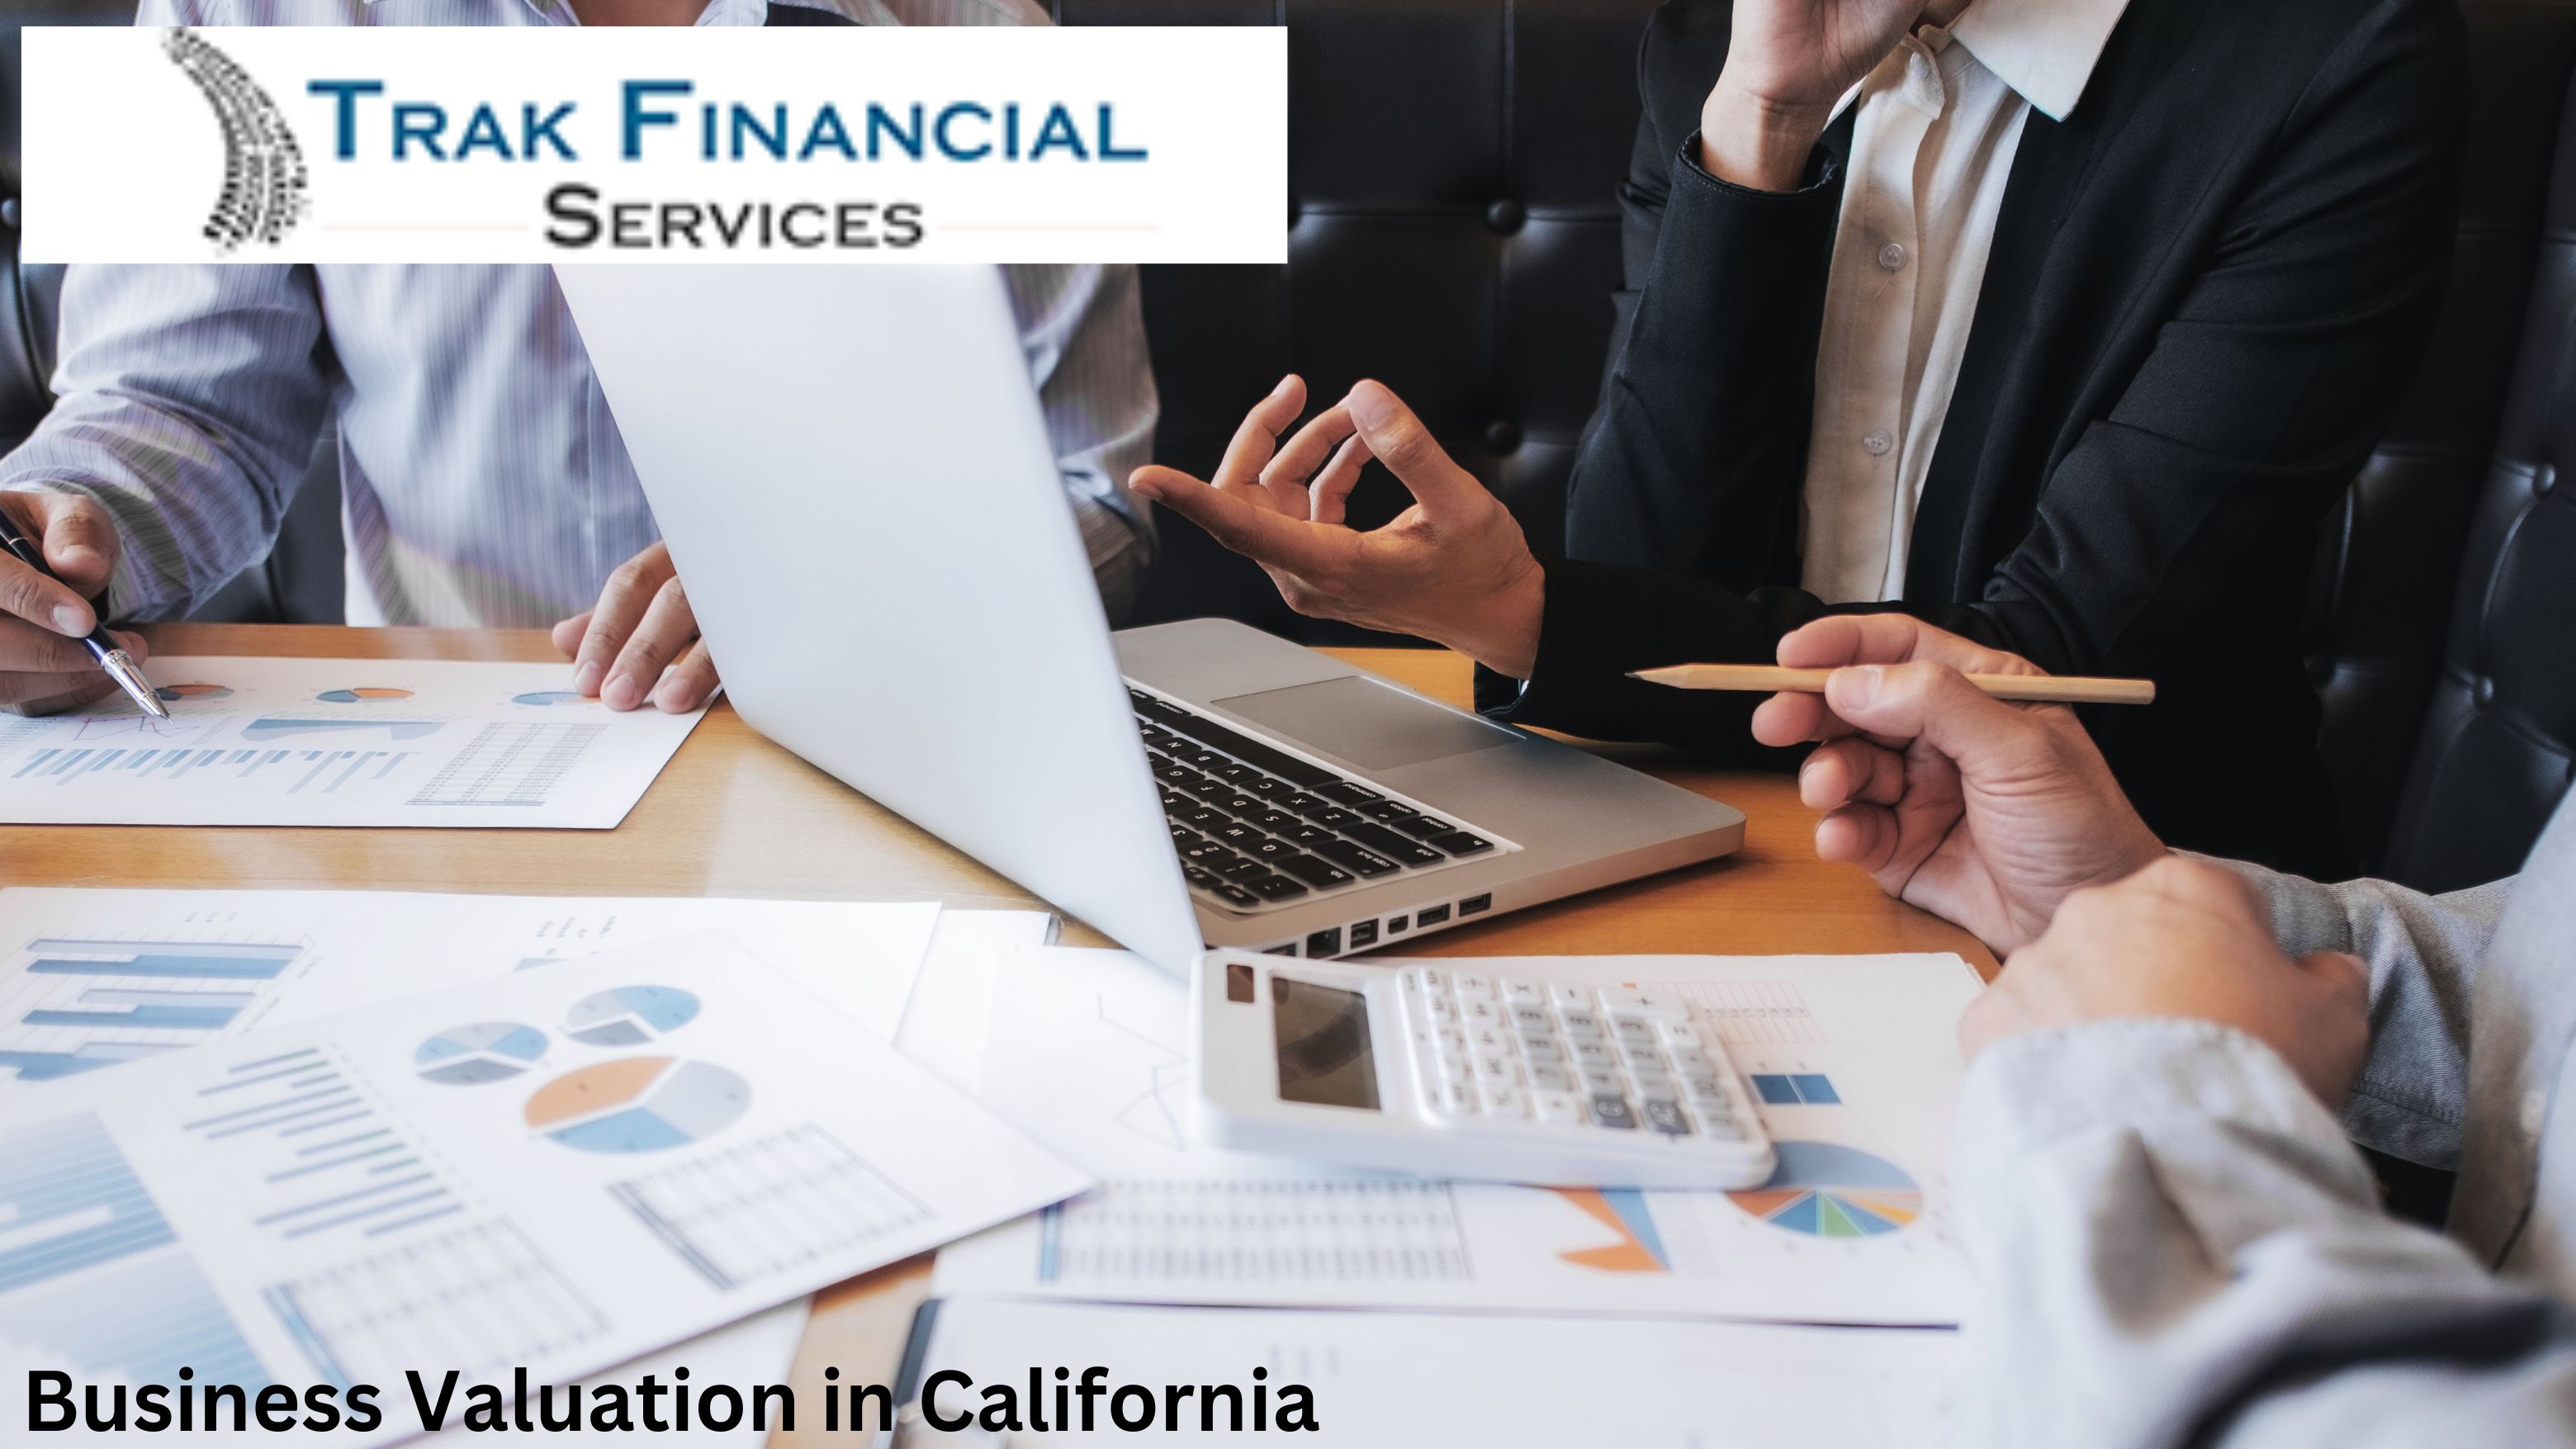 Business Appraisal Services - California - Cupertino ID1511266 4